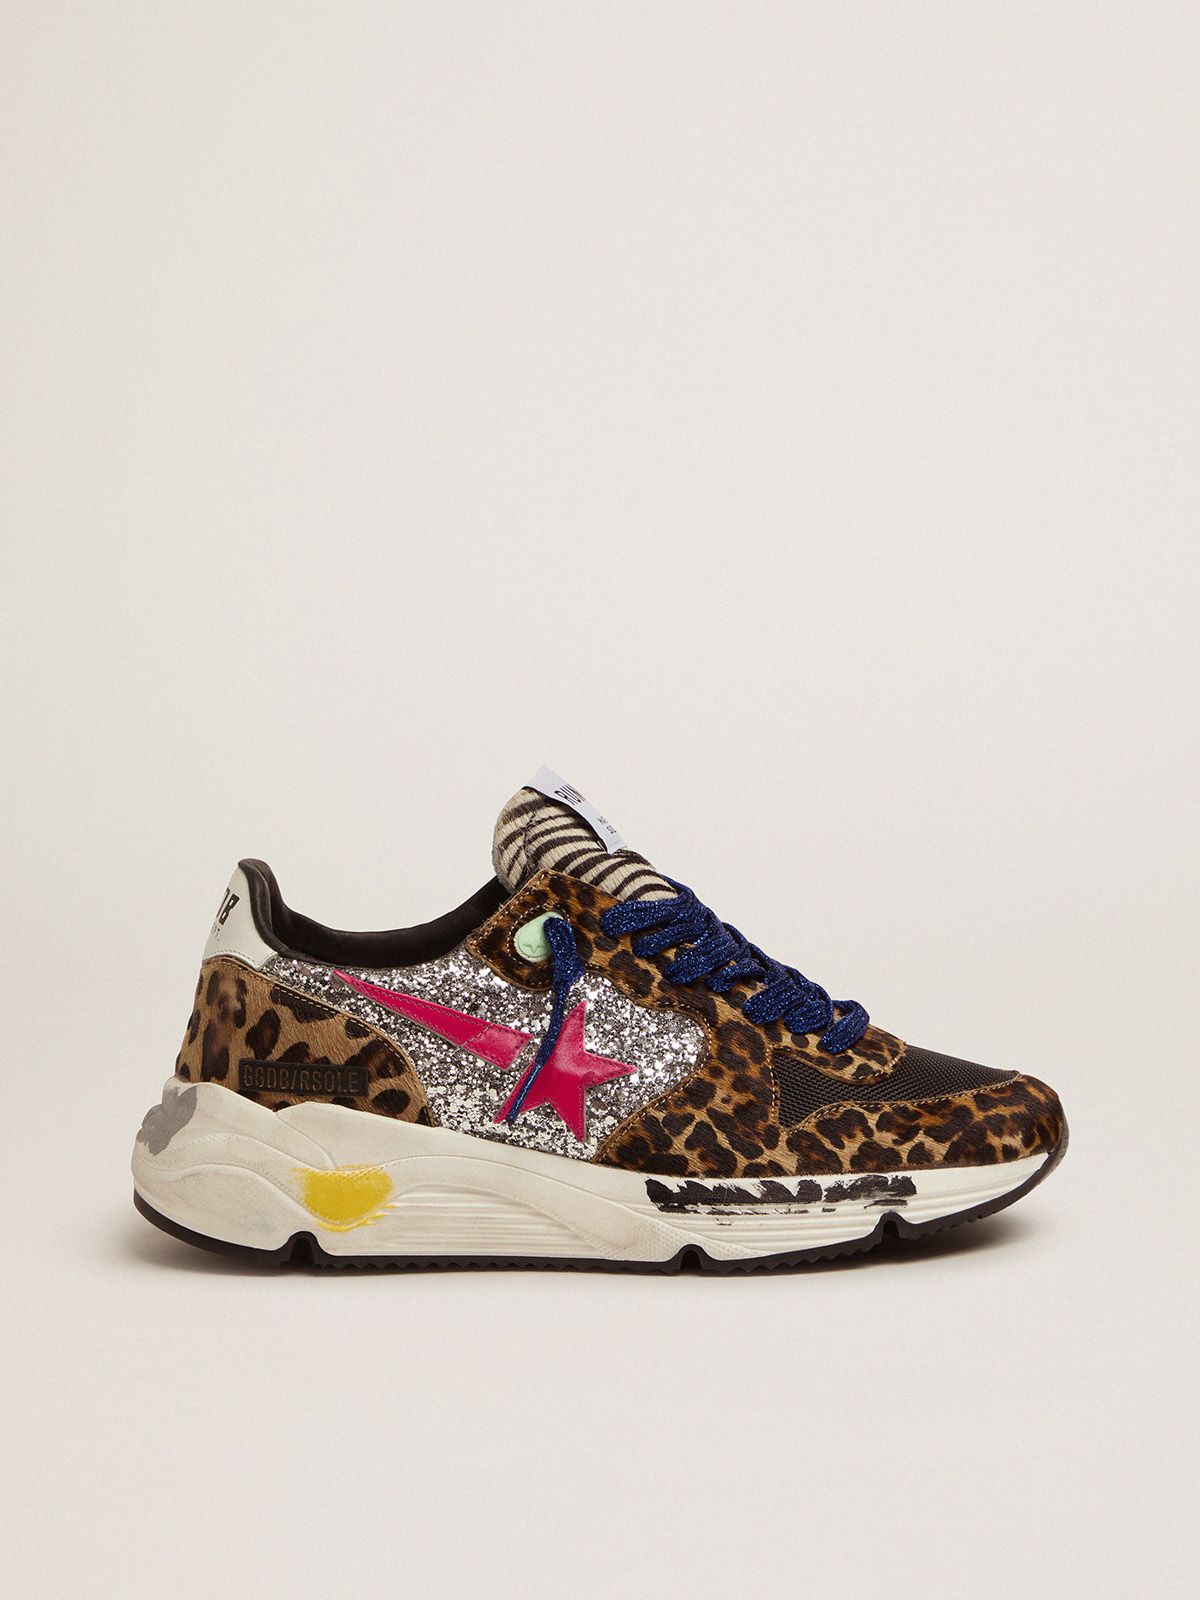 golden goose leopard-print glitter silver with Sole pony skin inserts. in Running sneakers